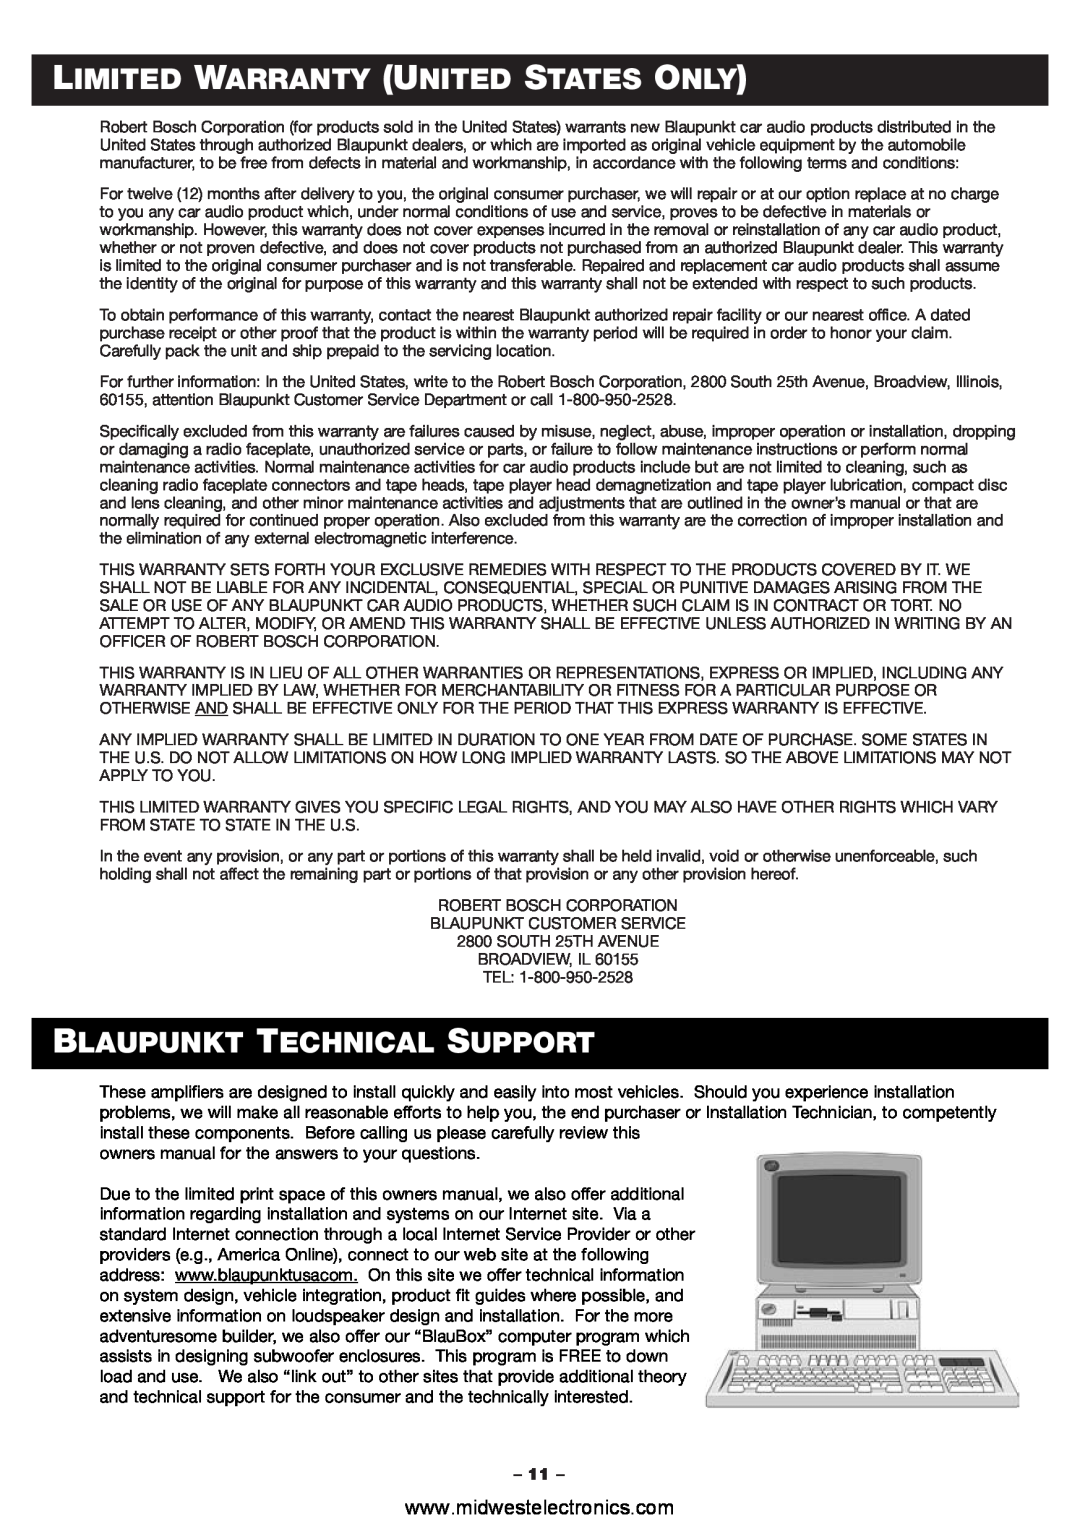 Blaupunkt PCA260, PCA2120 manual Limited Warranty United States Only, Blaupunkt Technical Support 